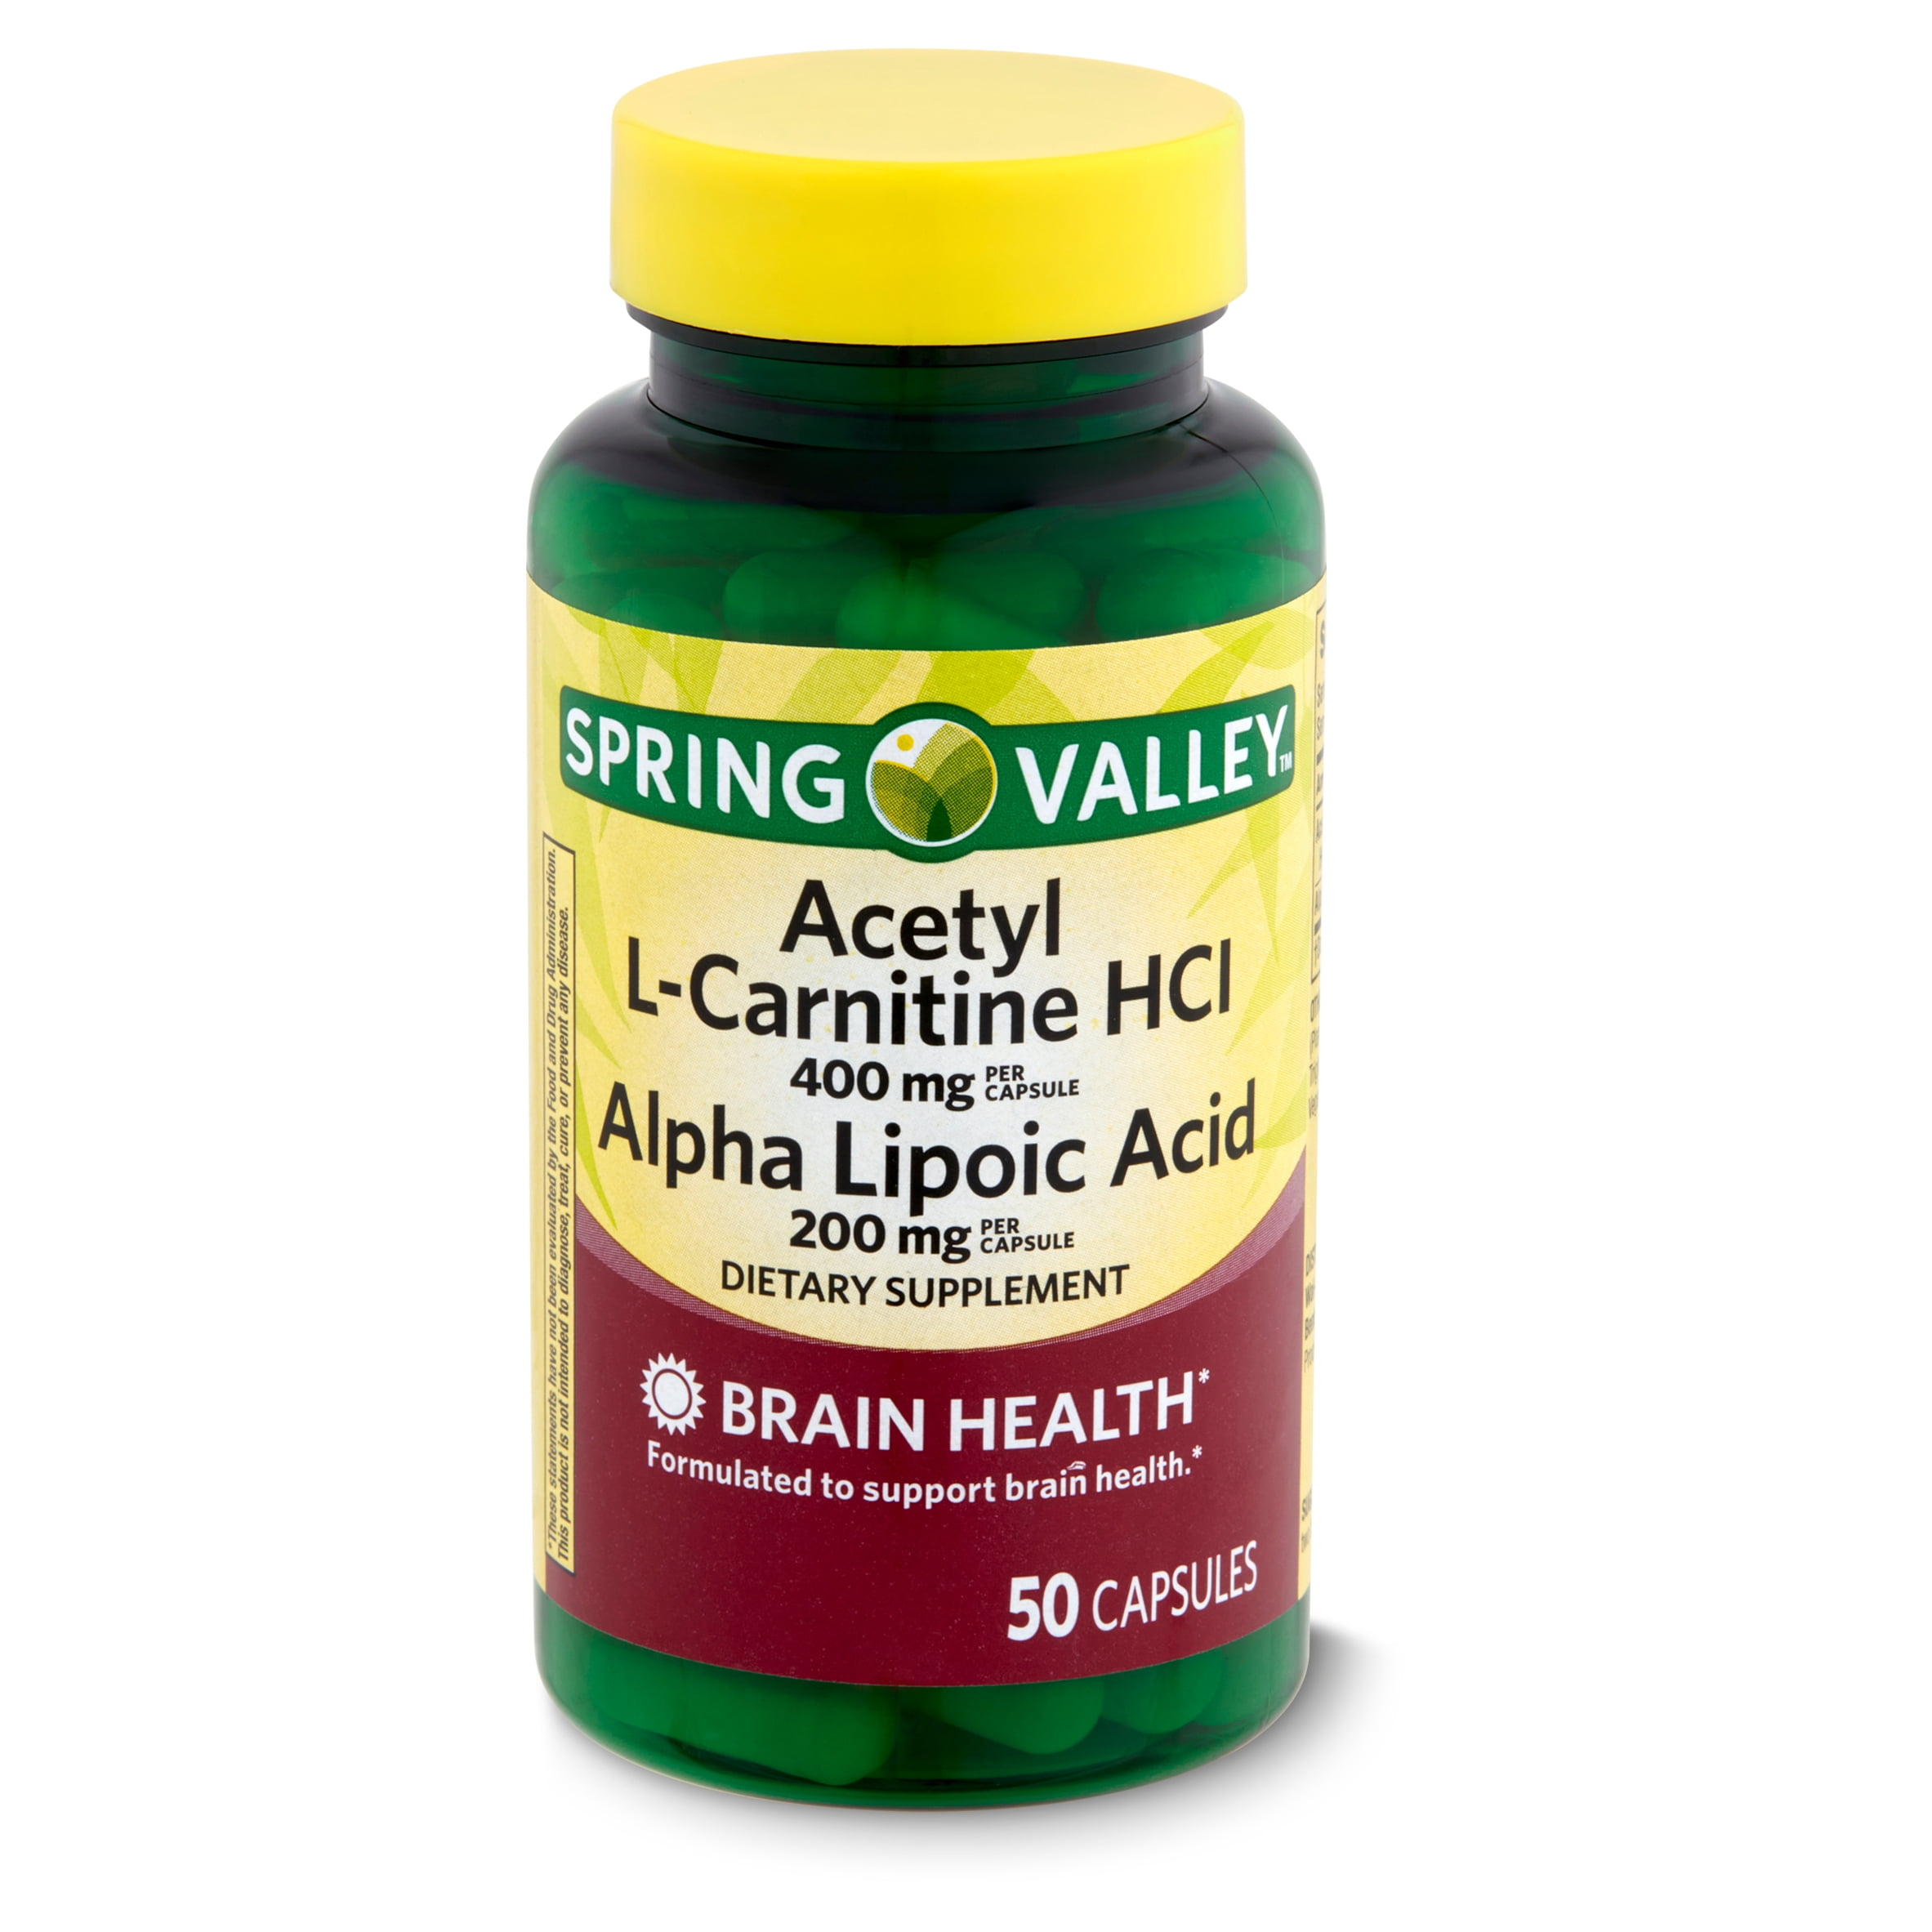 Spring Valley Acetyl L-Carnitine HCl and Alpha Lipoic Acid Dietary  Supplement, 50 Count 